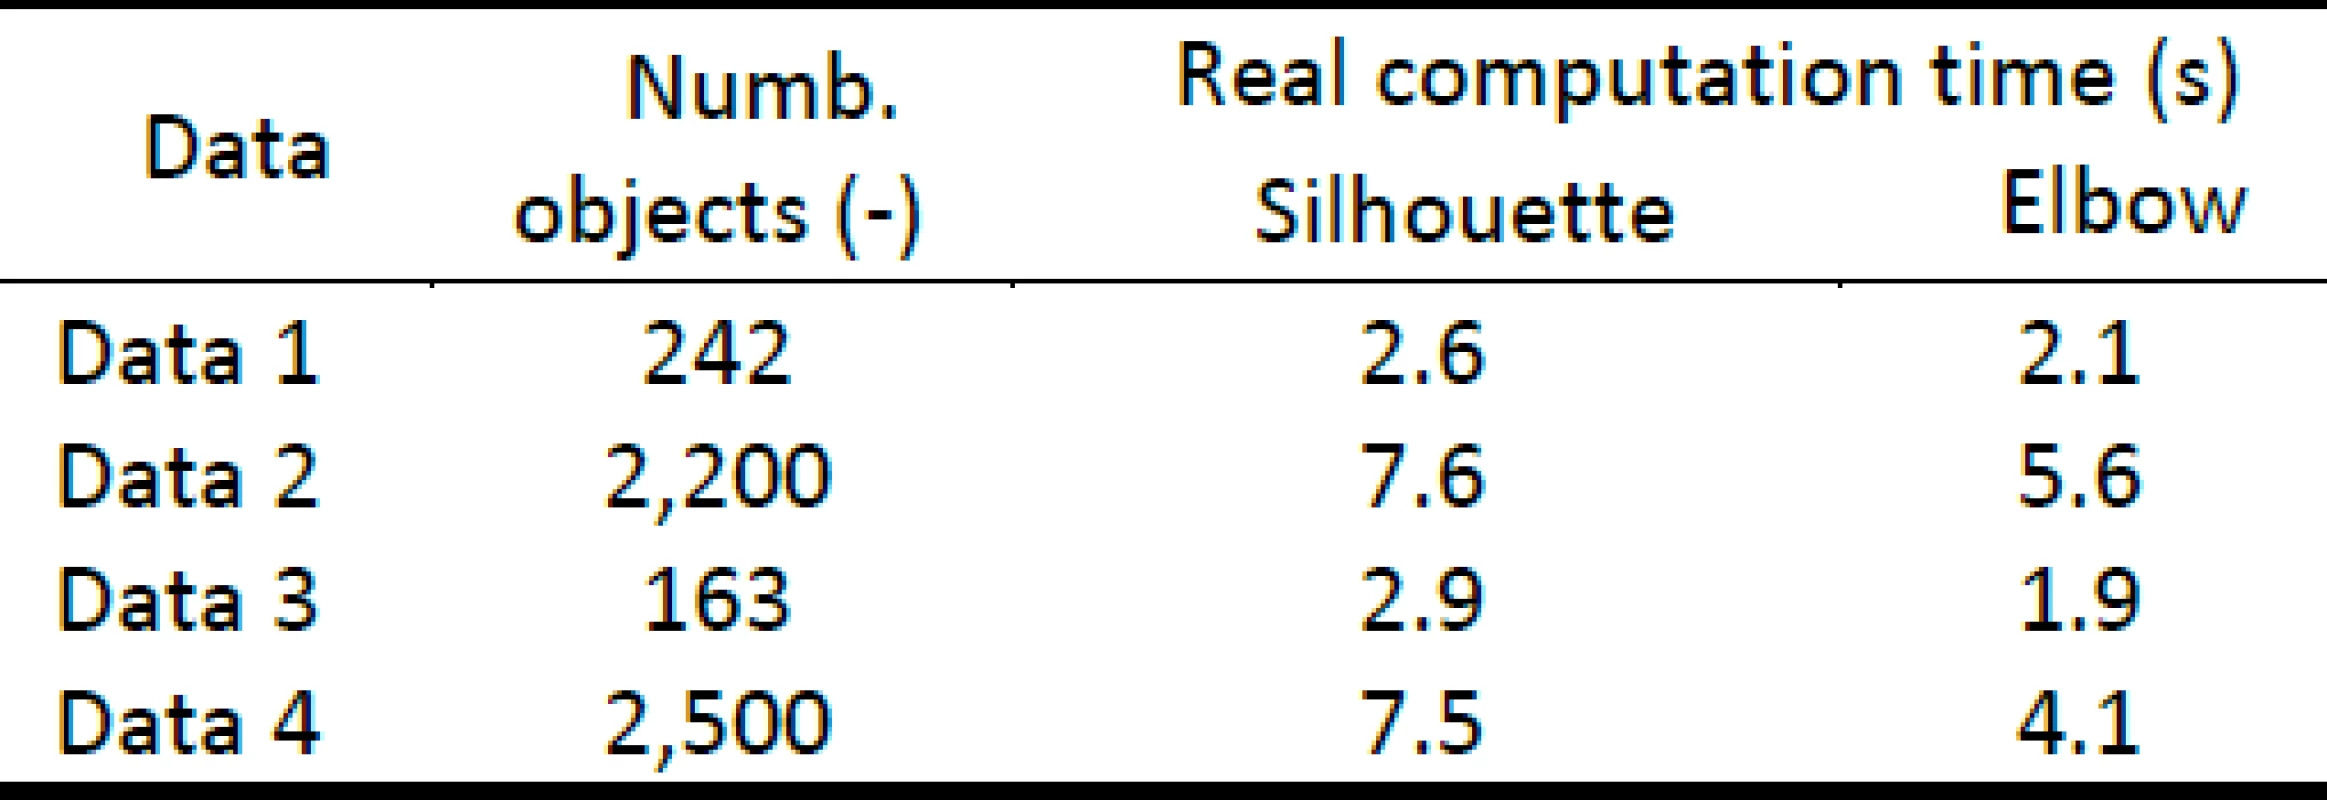 Number of objects included in the simulated data and real computation time of the method in seconds for the silhouettes and the elbow method.